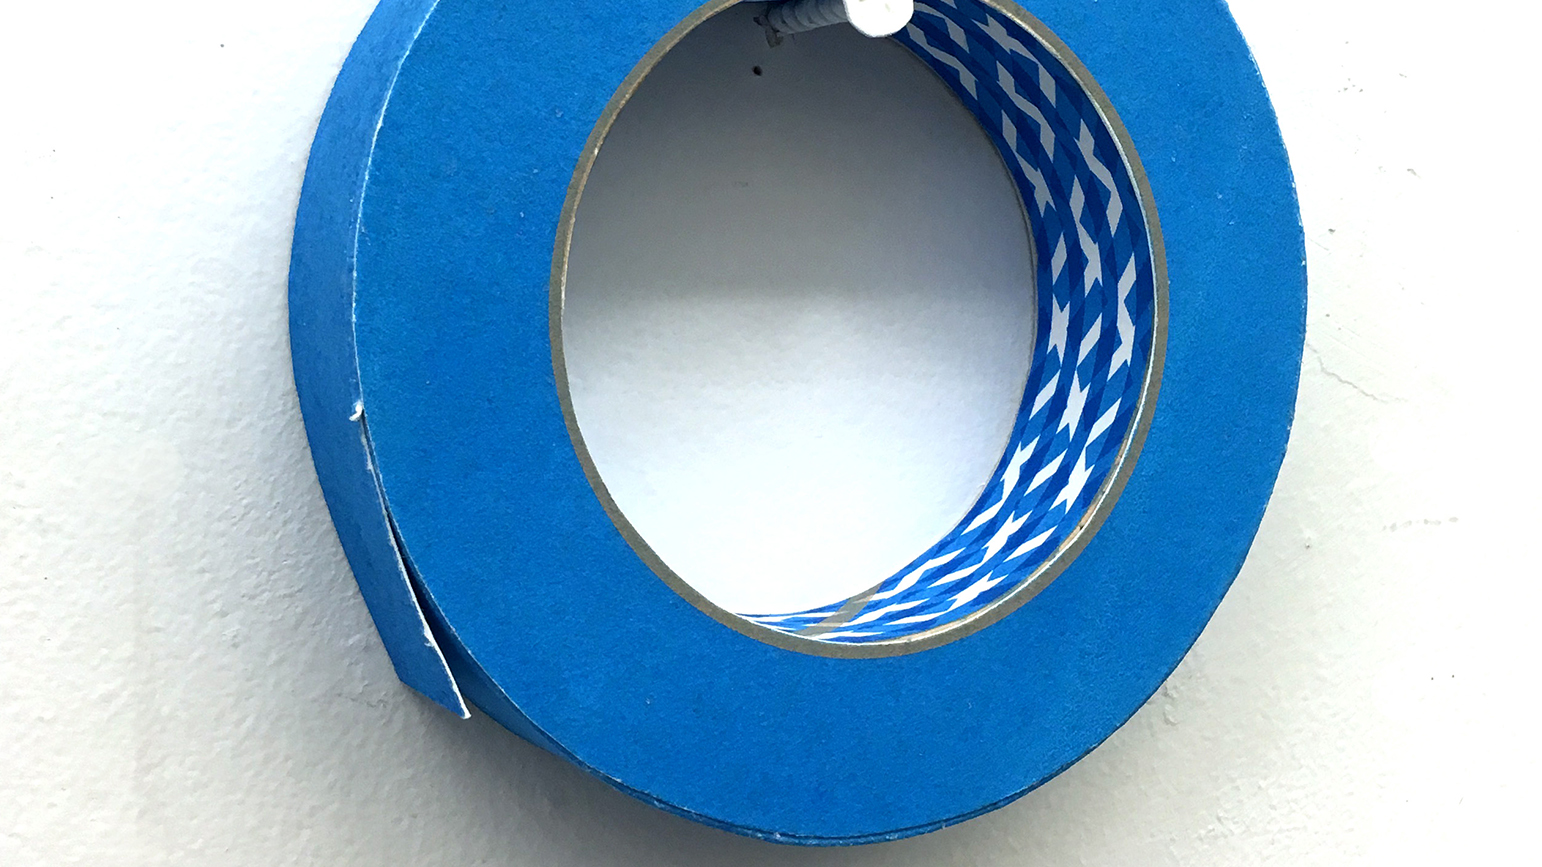 Image of a roll of blue painter's tape constructed from paper